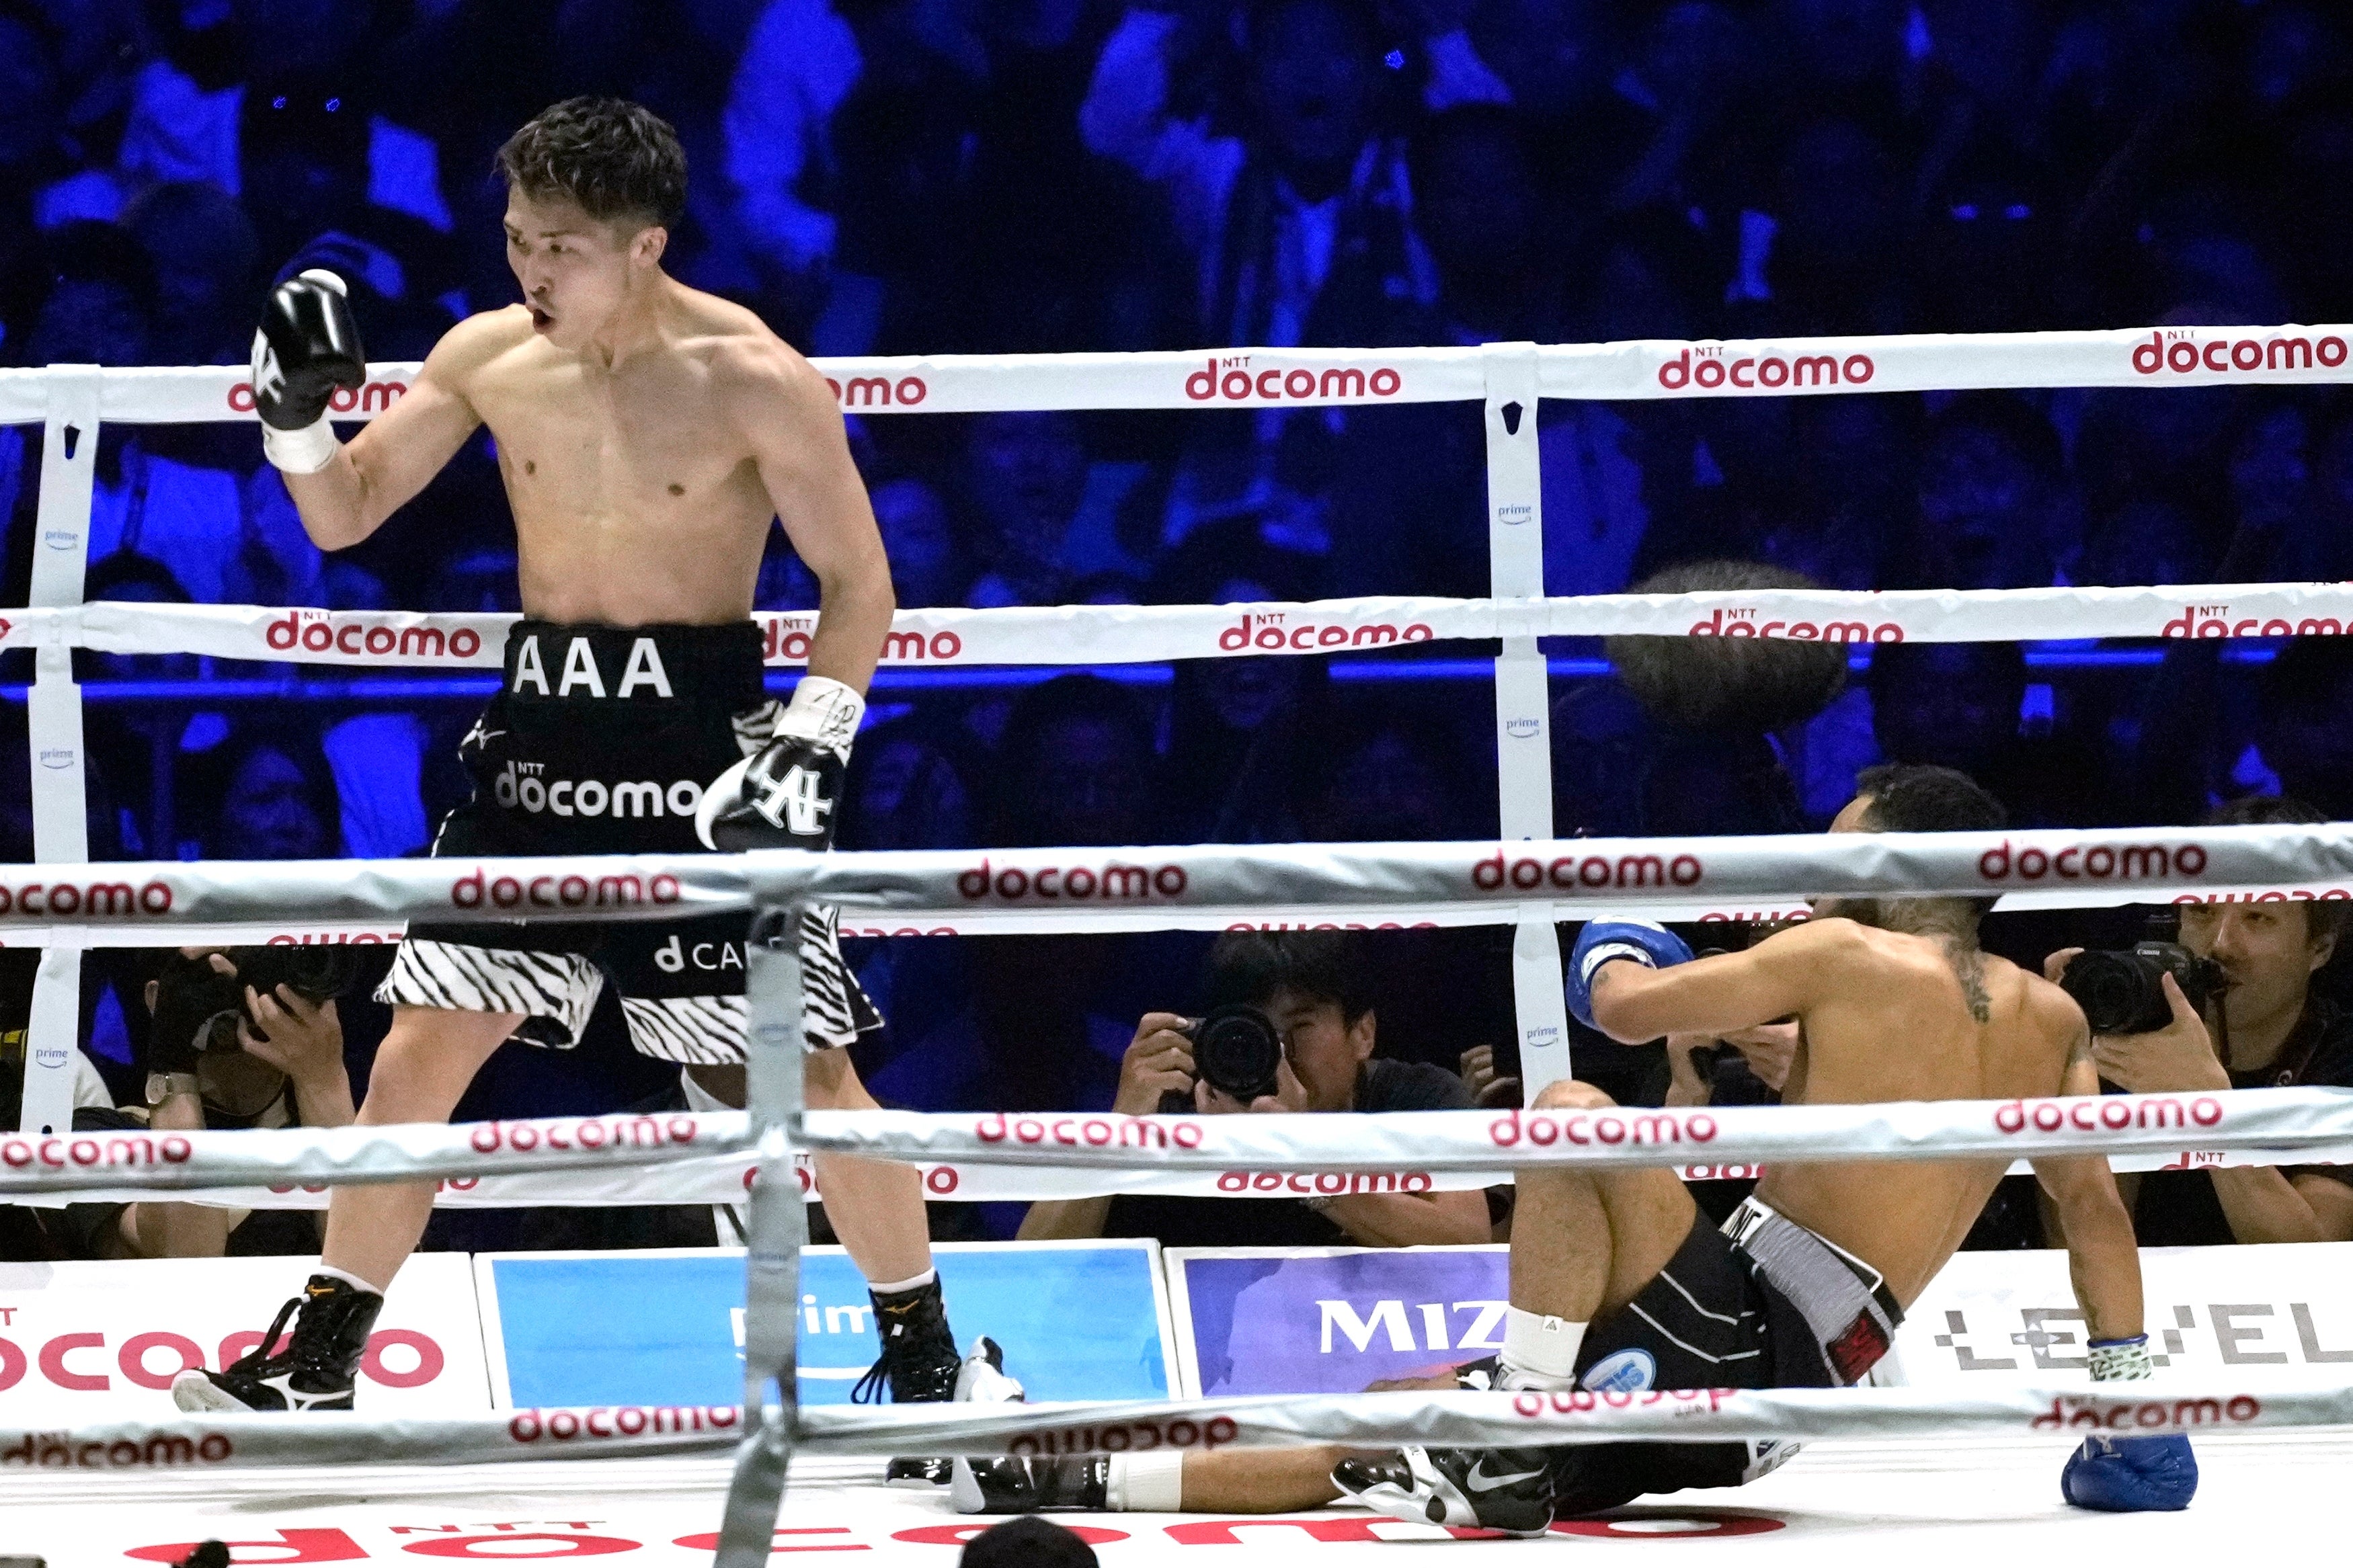 Inoue dropped Nery three times en route to a sixth-round knockout win